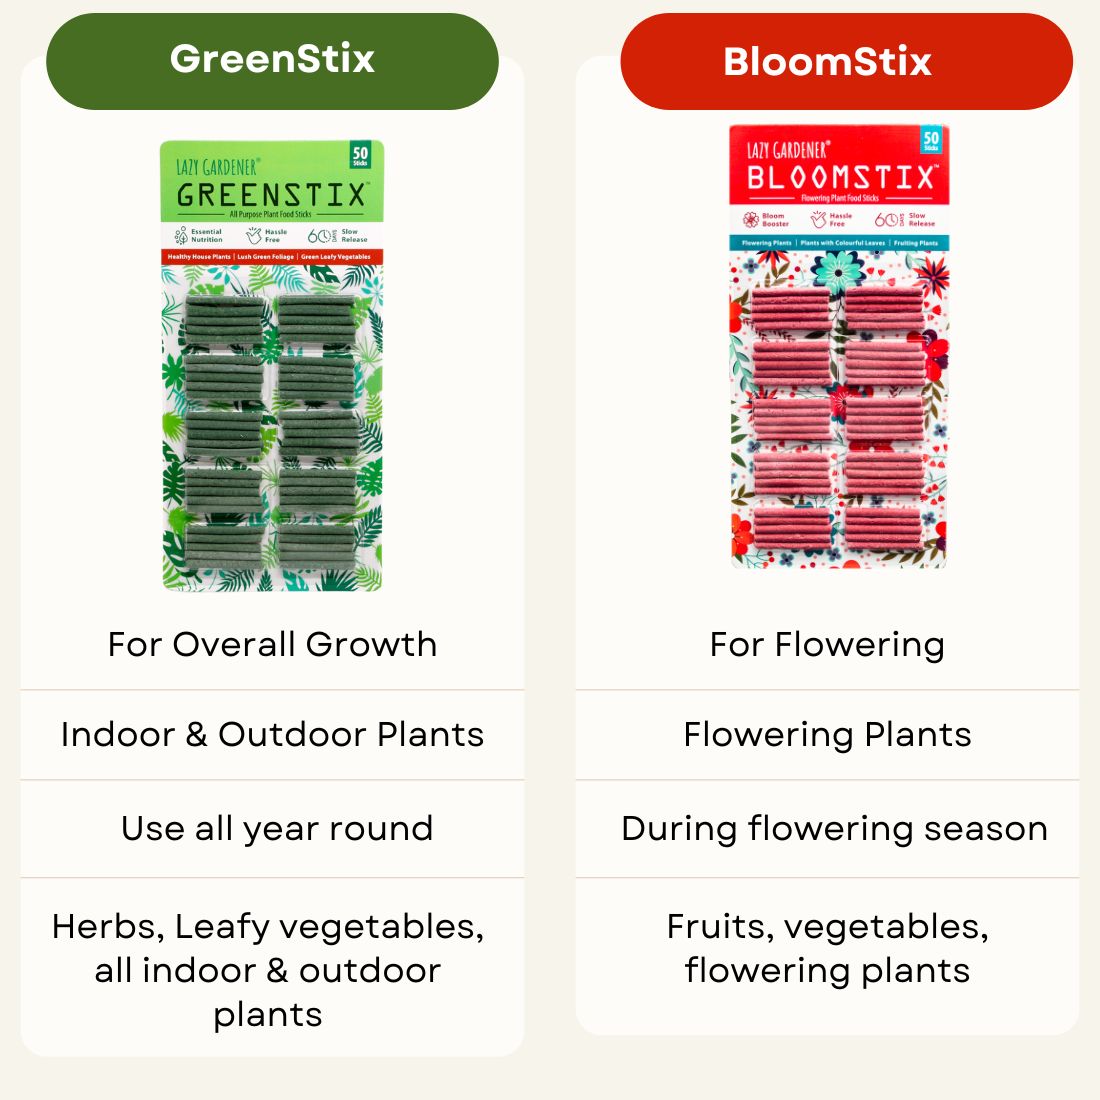 greenstix and bloomstix differences